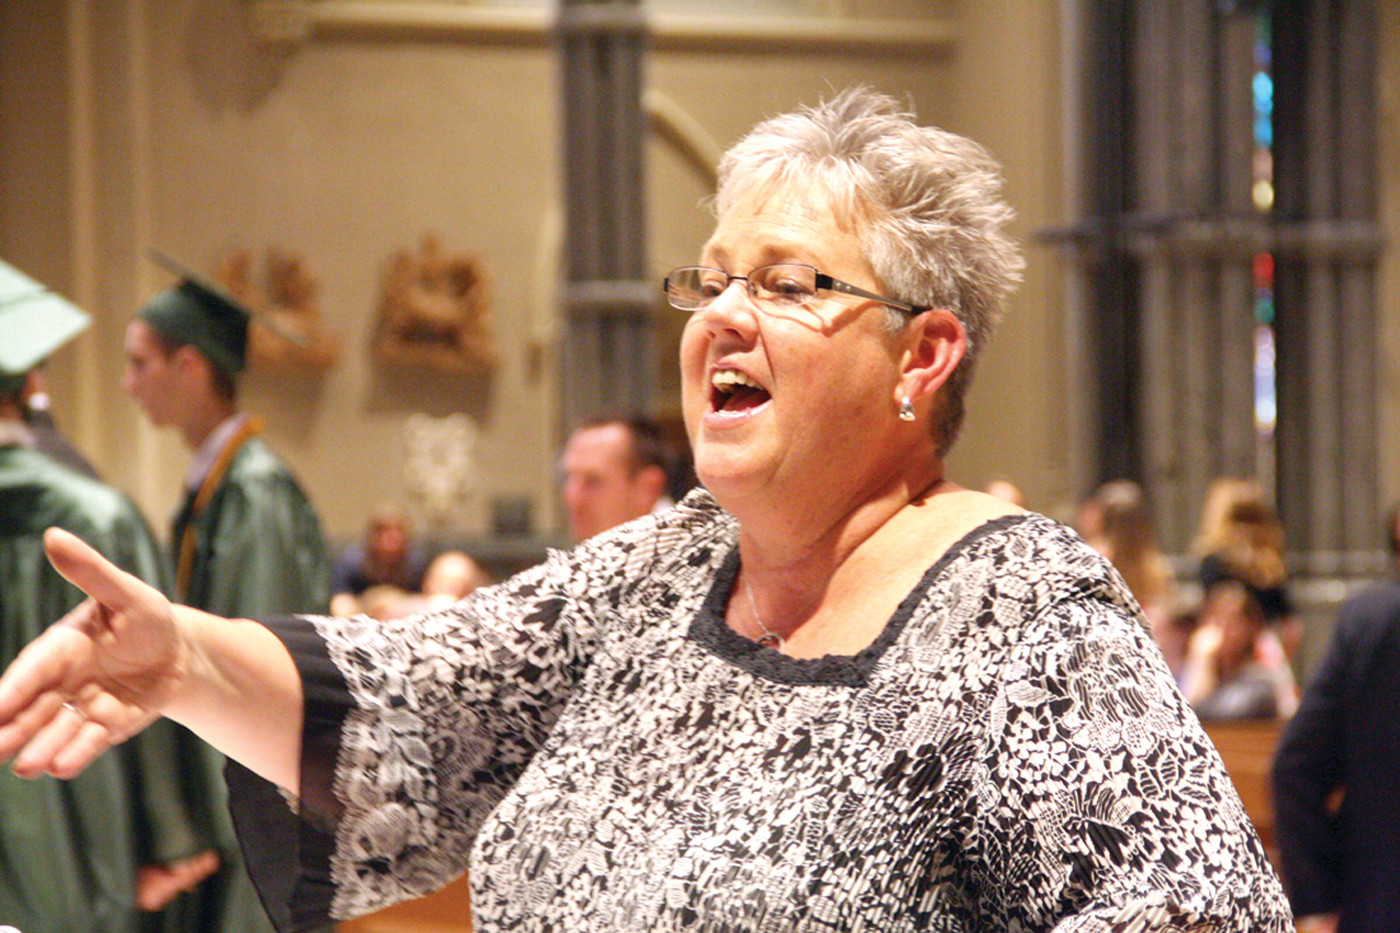 LIFTING THEIR VOICES: Mary Jo Gambardella directs the chorus in a selection prior to the start of the ceremony.